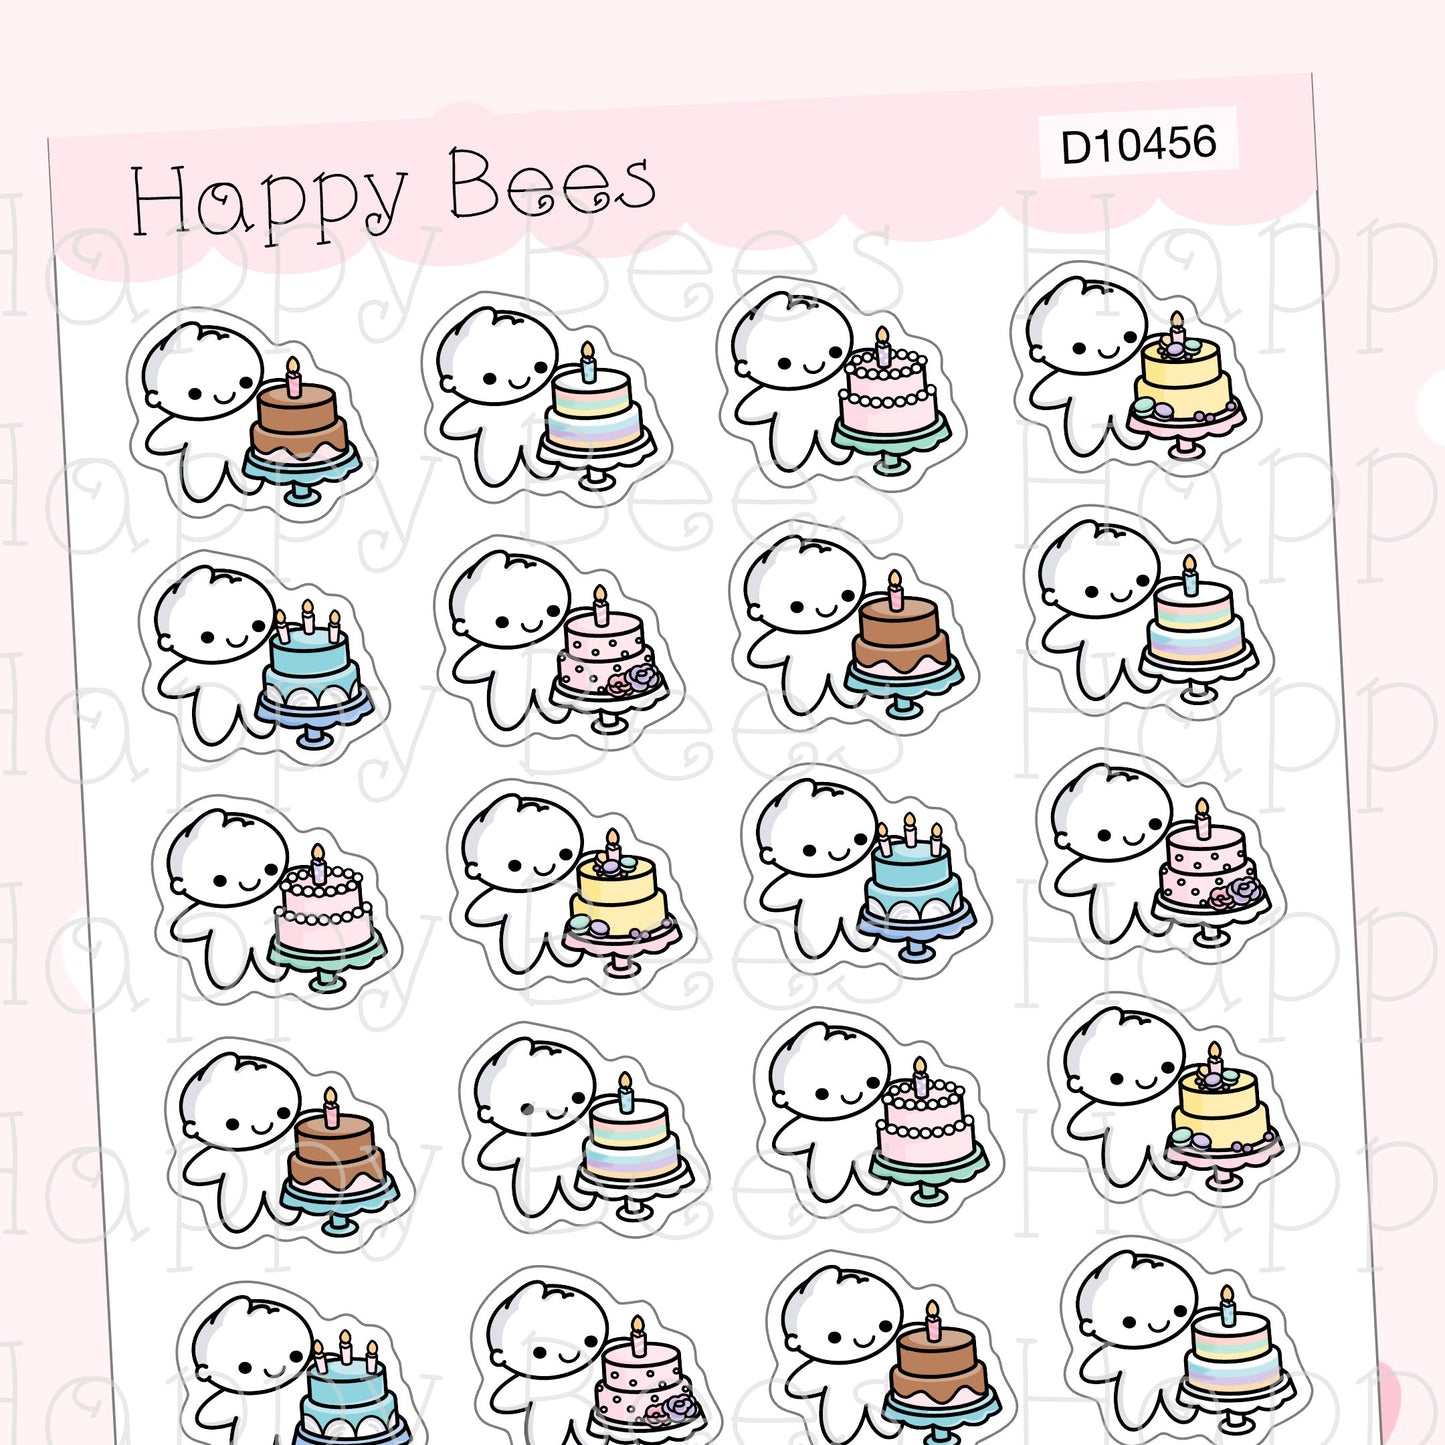 Birthday Cake Doodles  - Cute Celebration Food Planner Stickers D10456